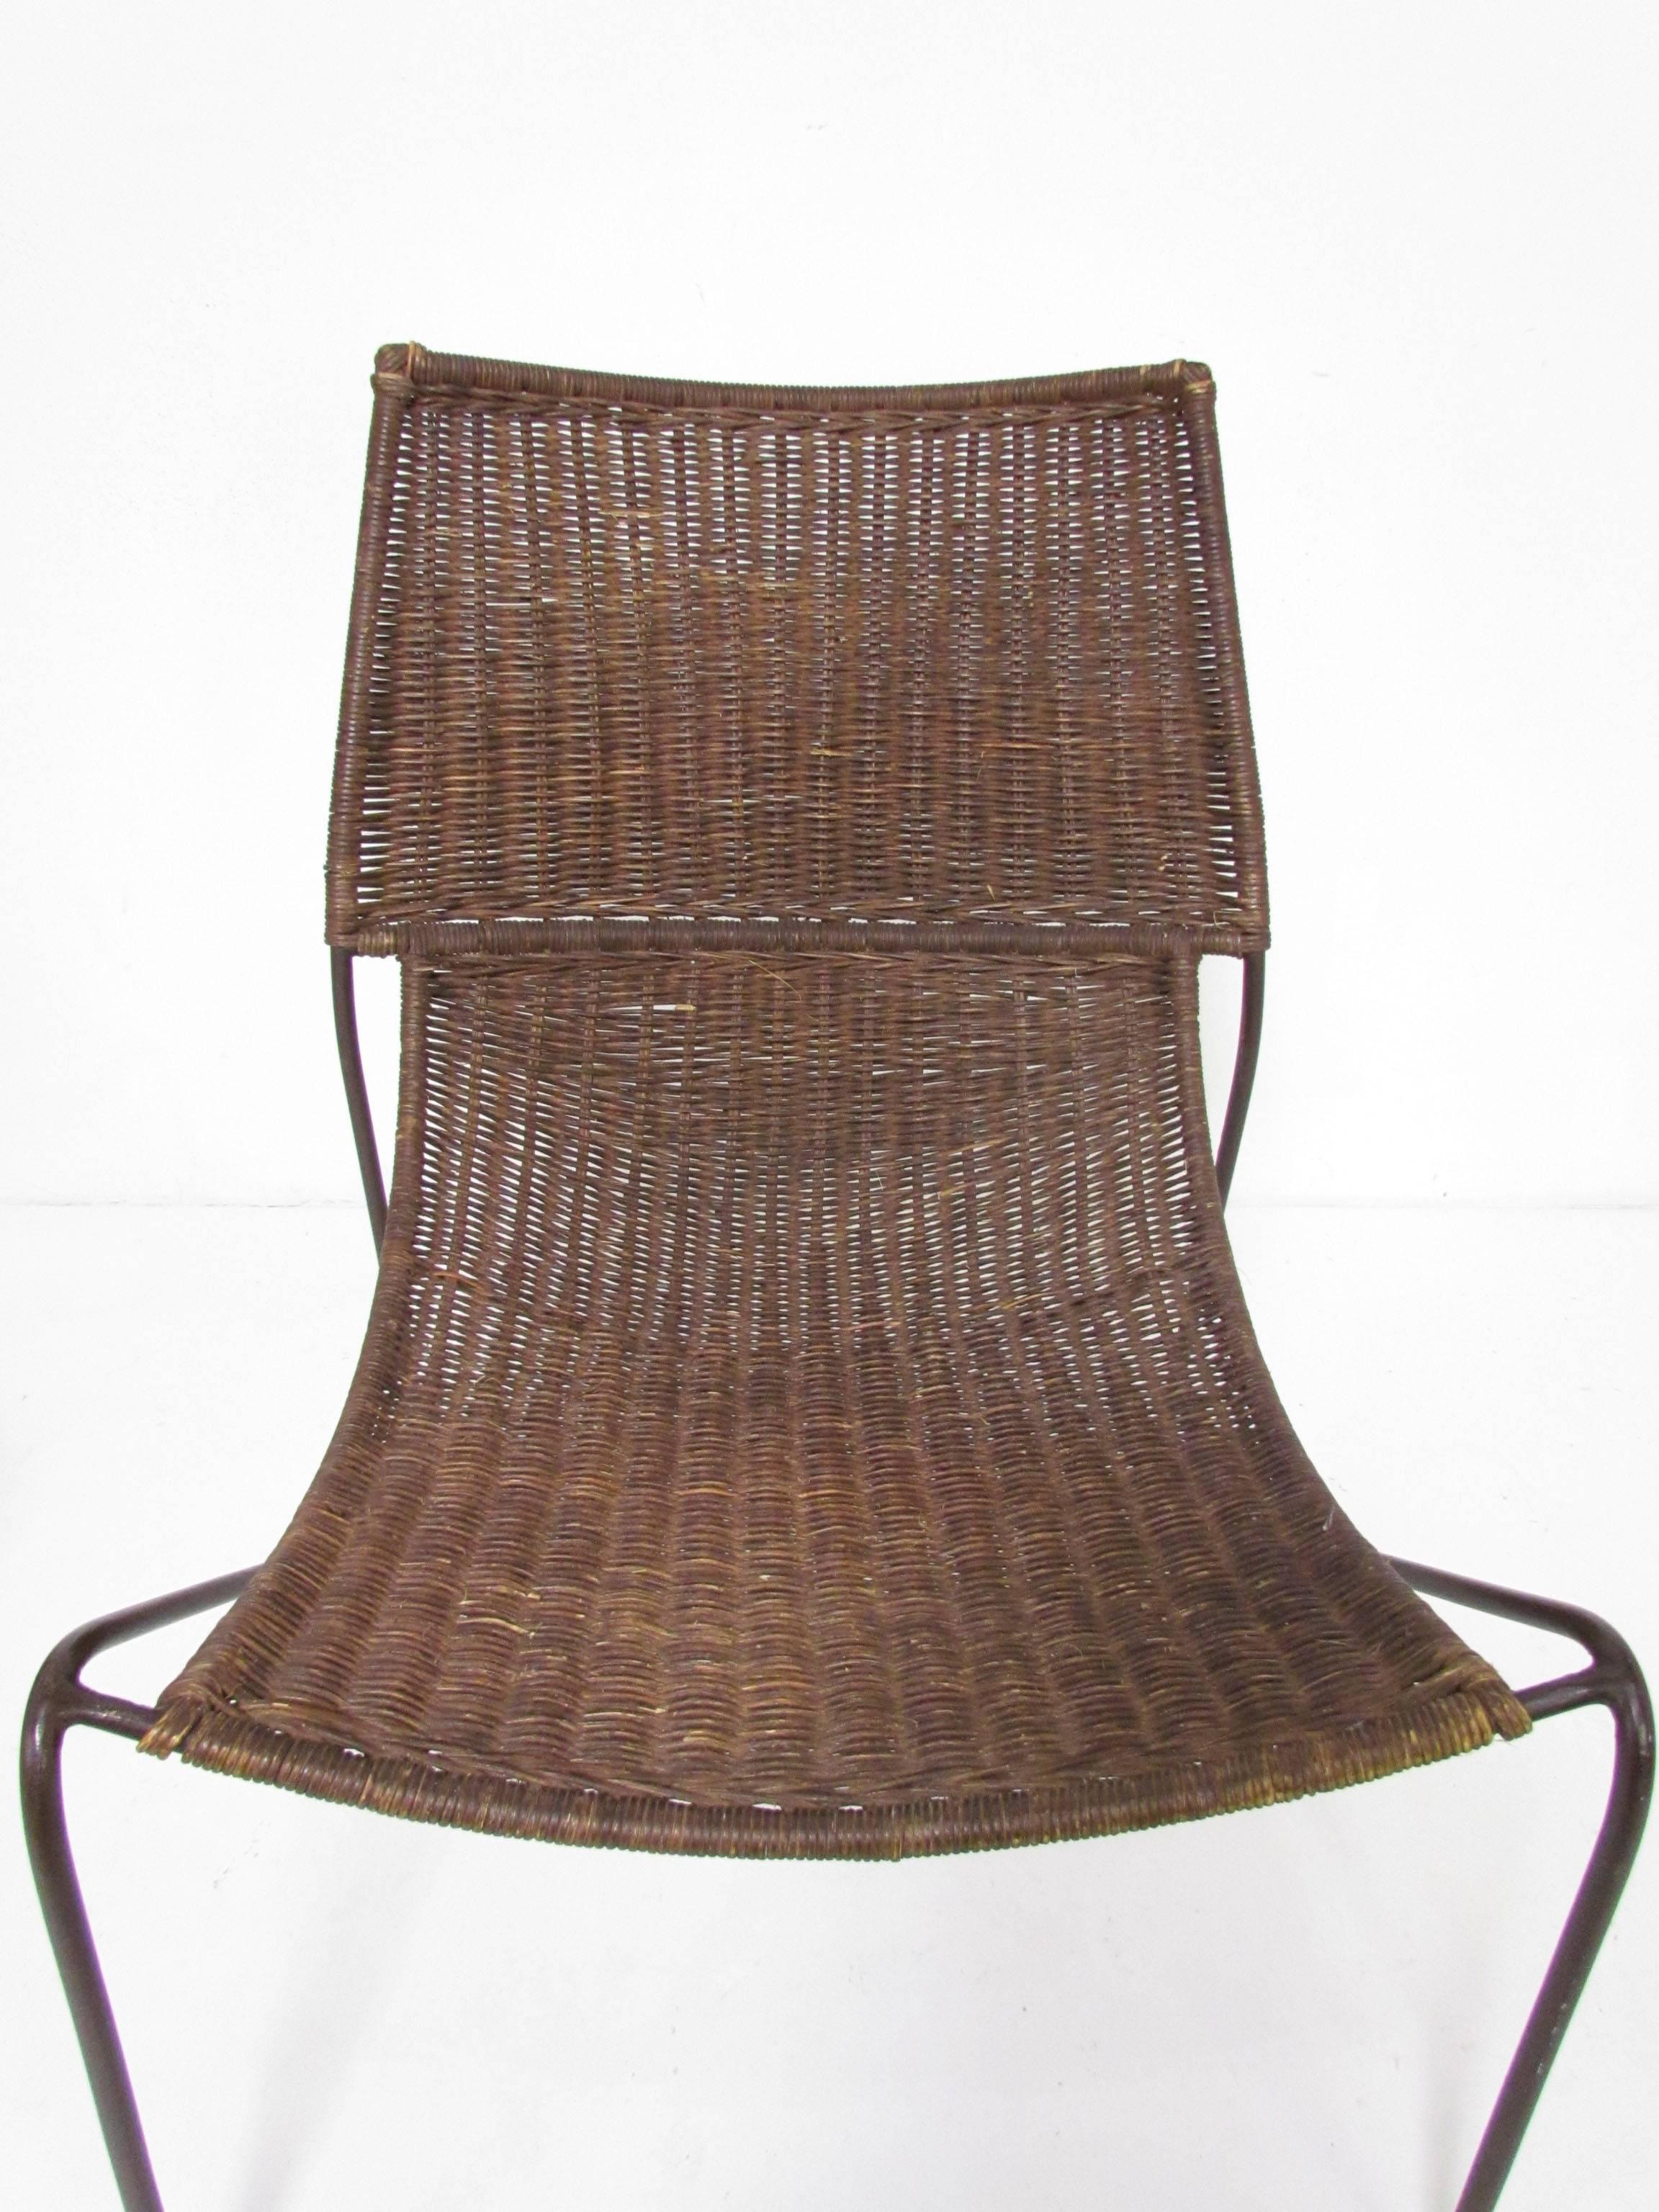 Late 20th Century Pair of Scoop Form Wicker Lounge Chairs in the Manner of Van Keppel and Green